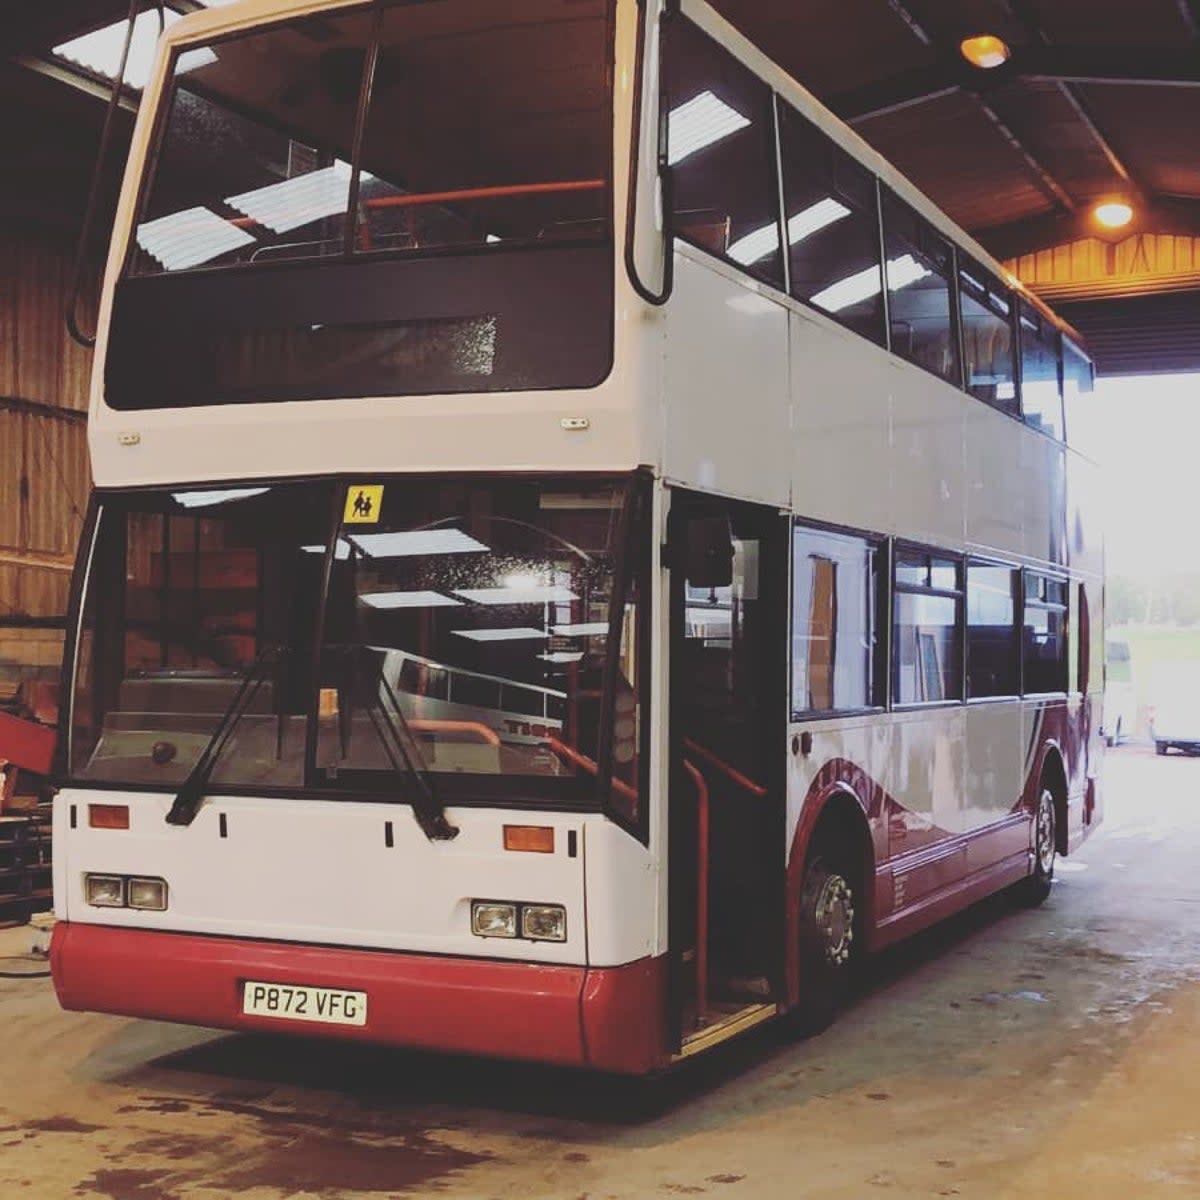 The bus when they first bought it (Lamorna Hollingsworth/@we_bought_a_double_decker)